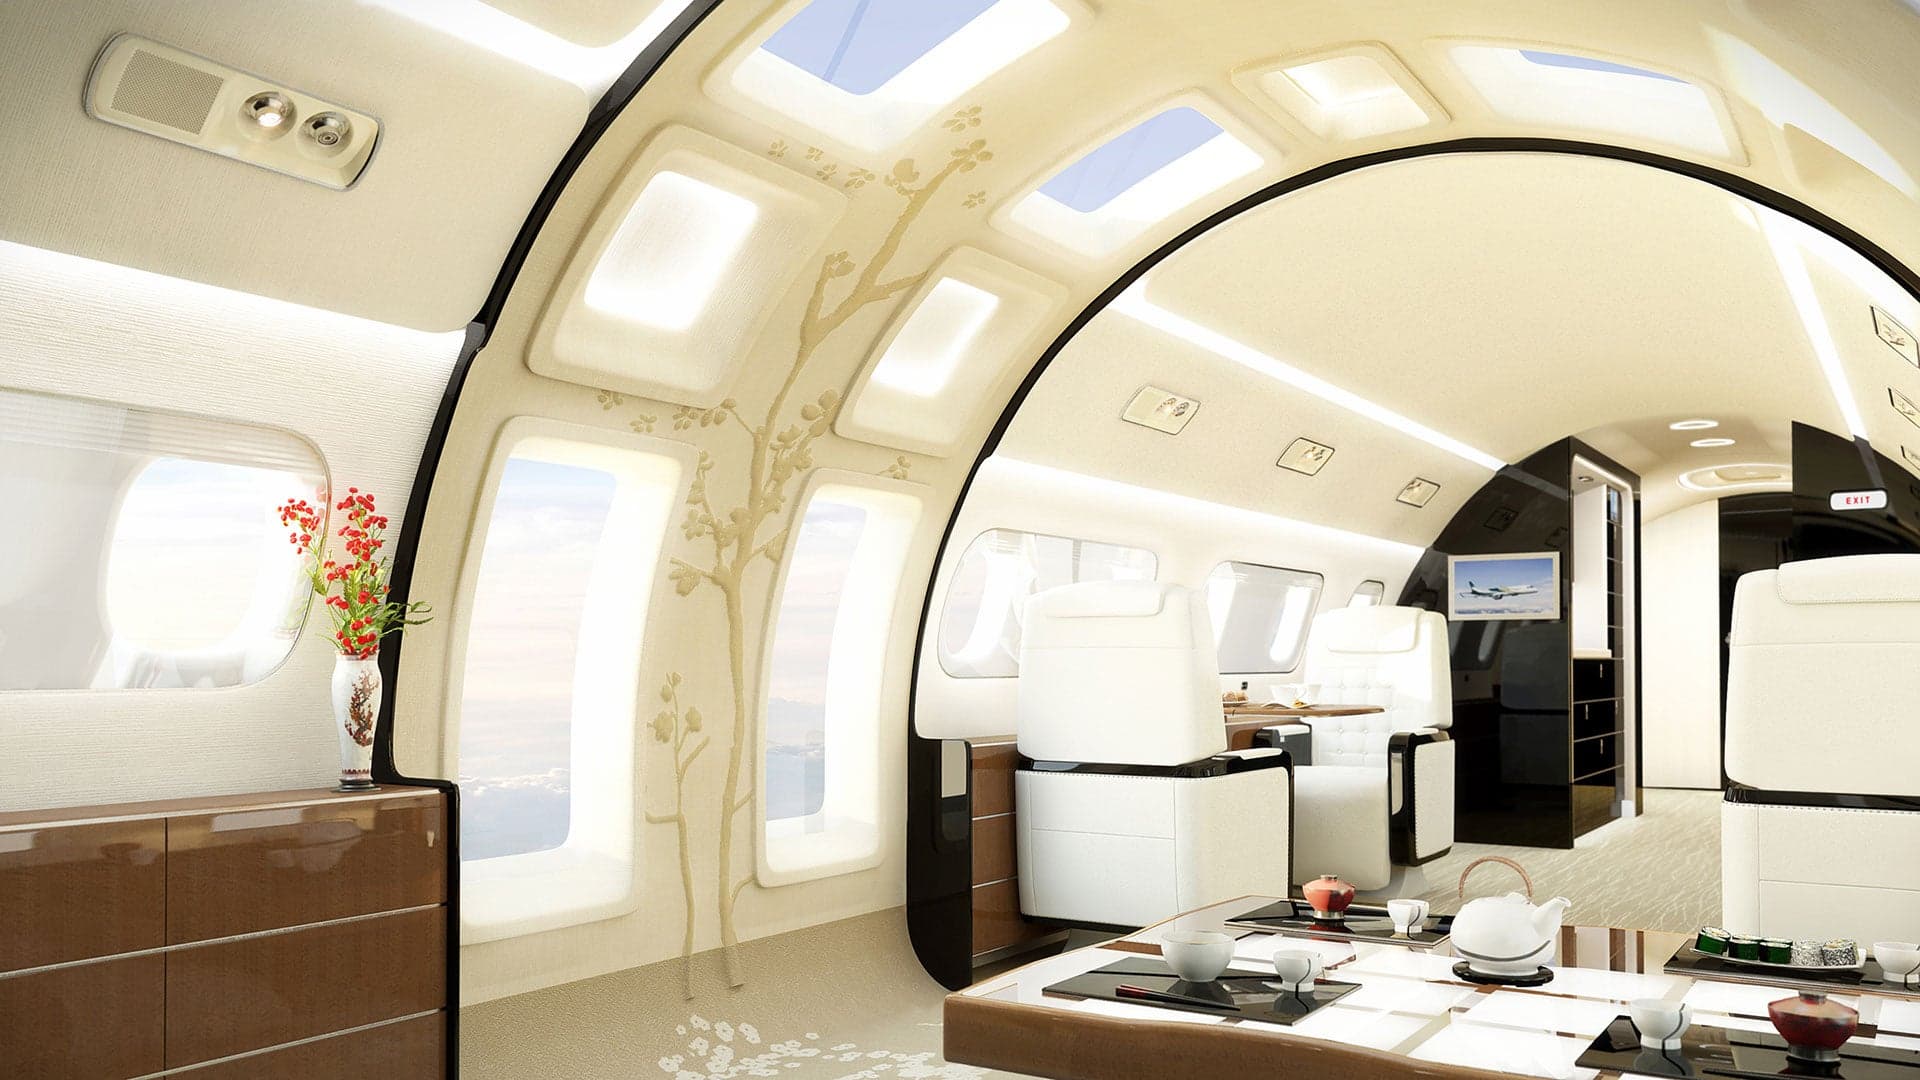 You Can Now Buy a Private Jet With a Wall of Windows